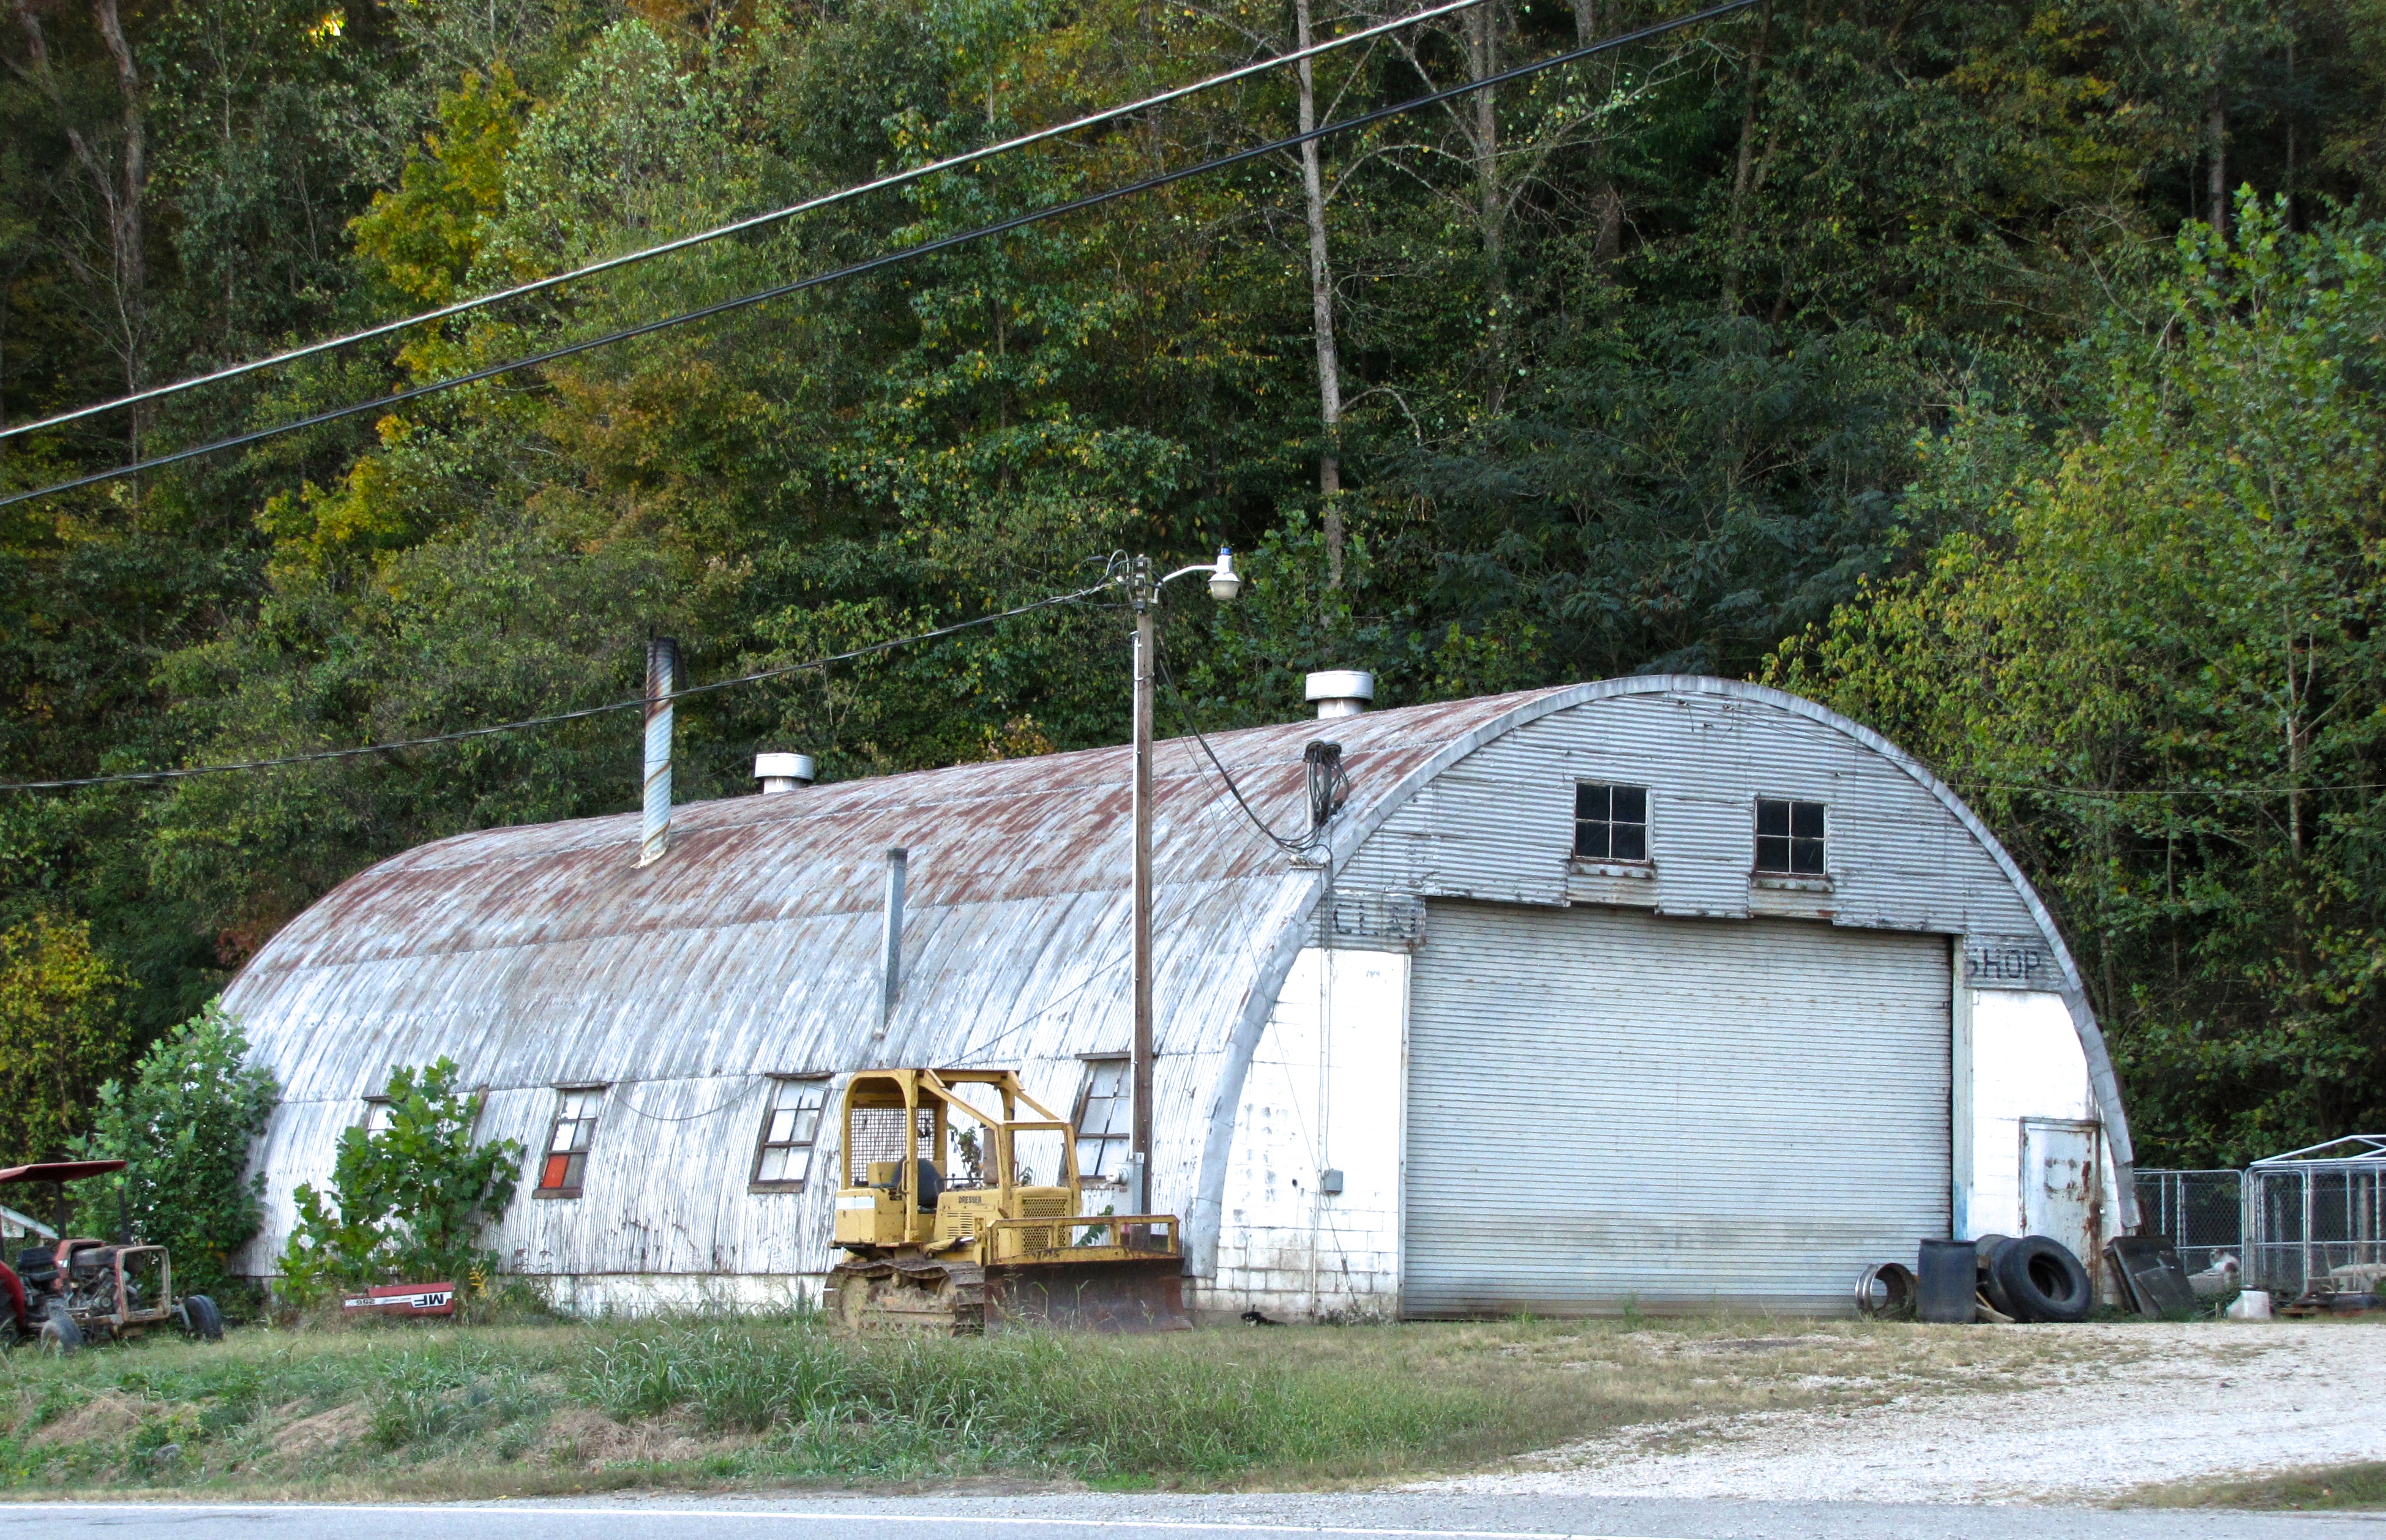 quonset hut in About Us, TN